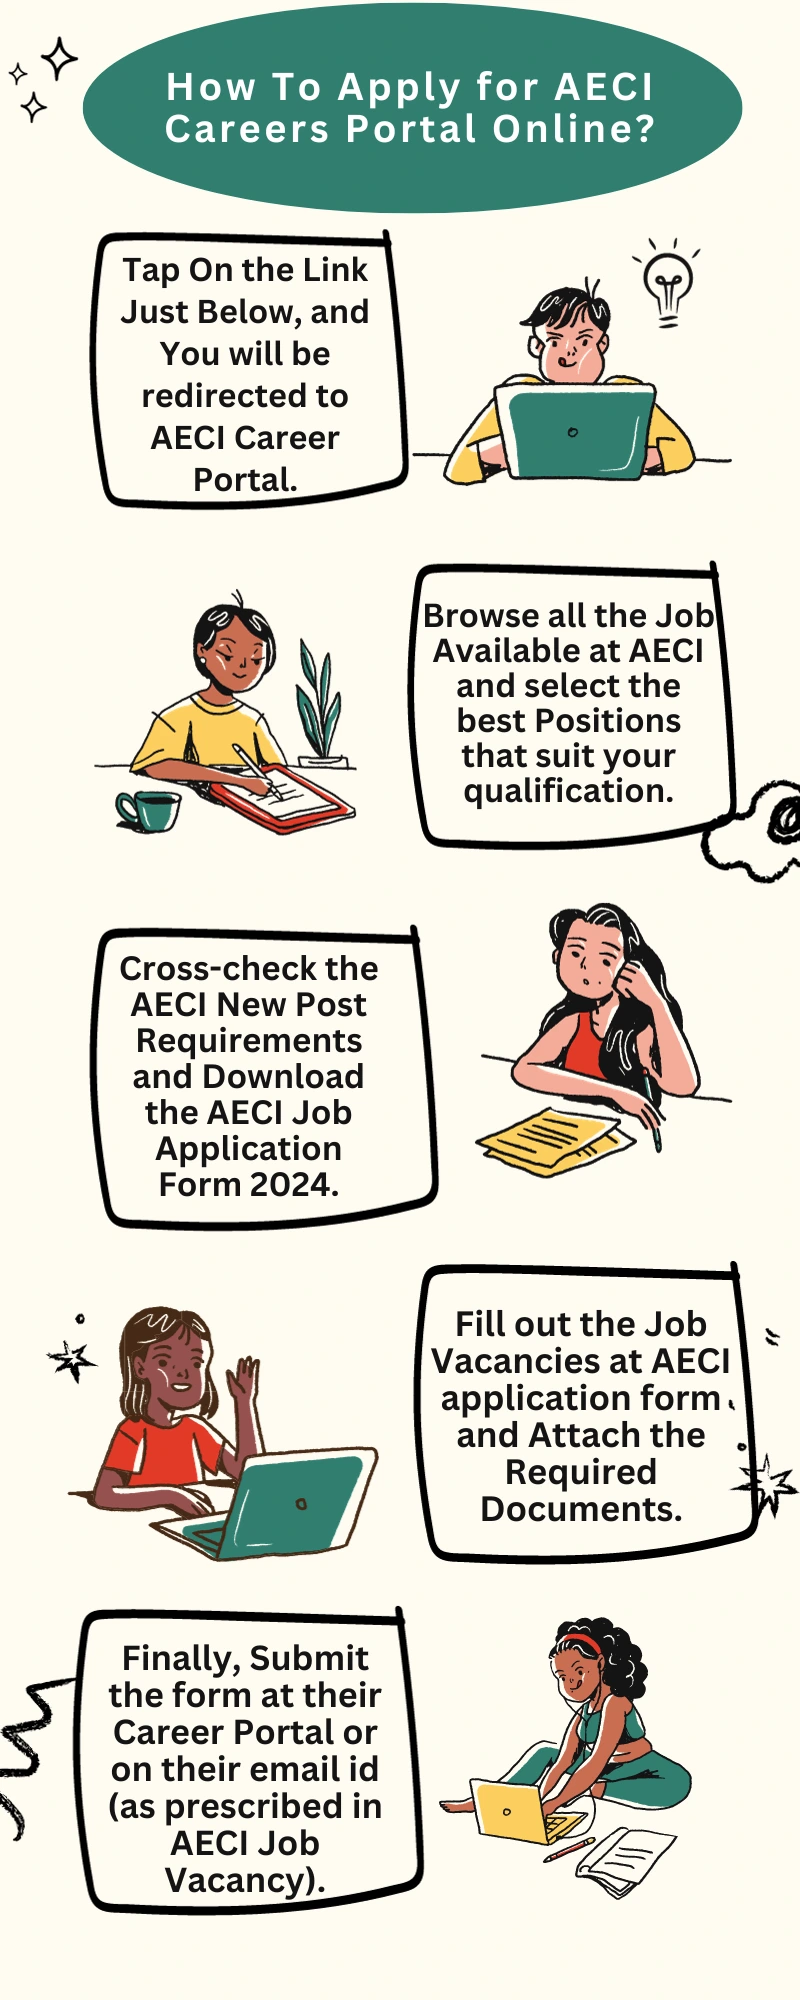 How To Apply for AECI Careers Portal Online?